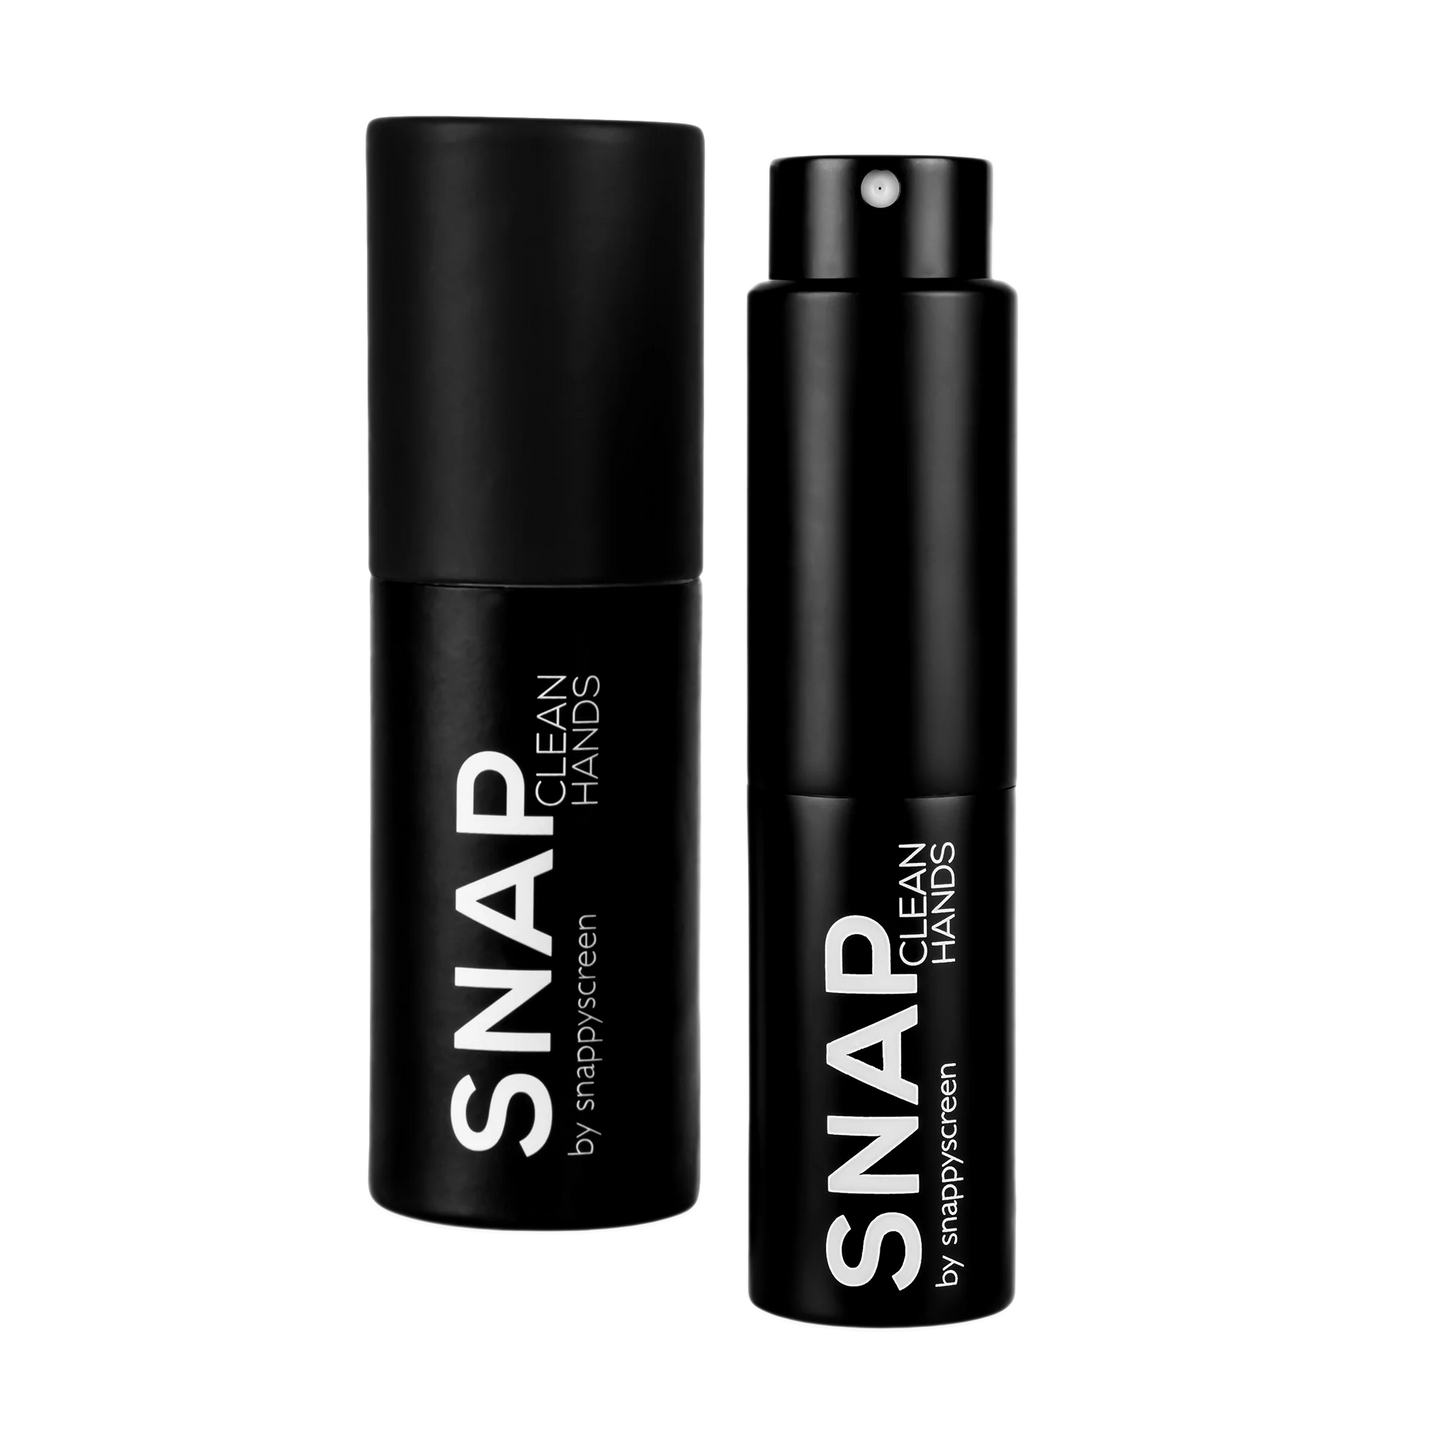 SNAP Signature Scent Personal Hand Sanitizer